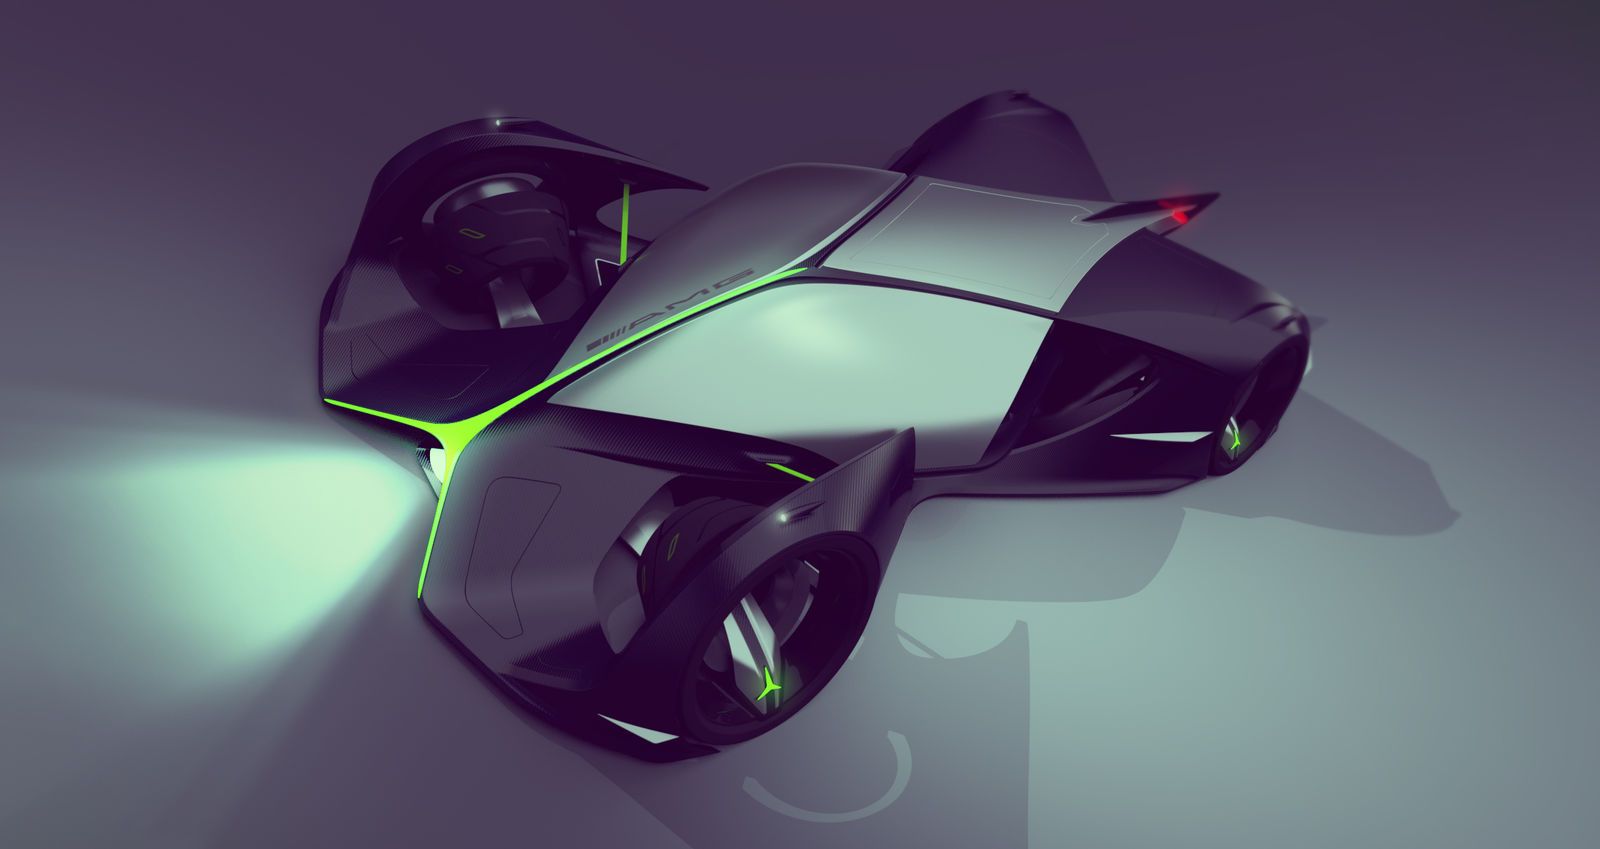 Amazing futuristic car designs from racing cars to rescue vehicles image 43